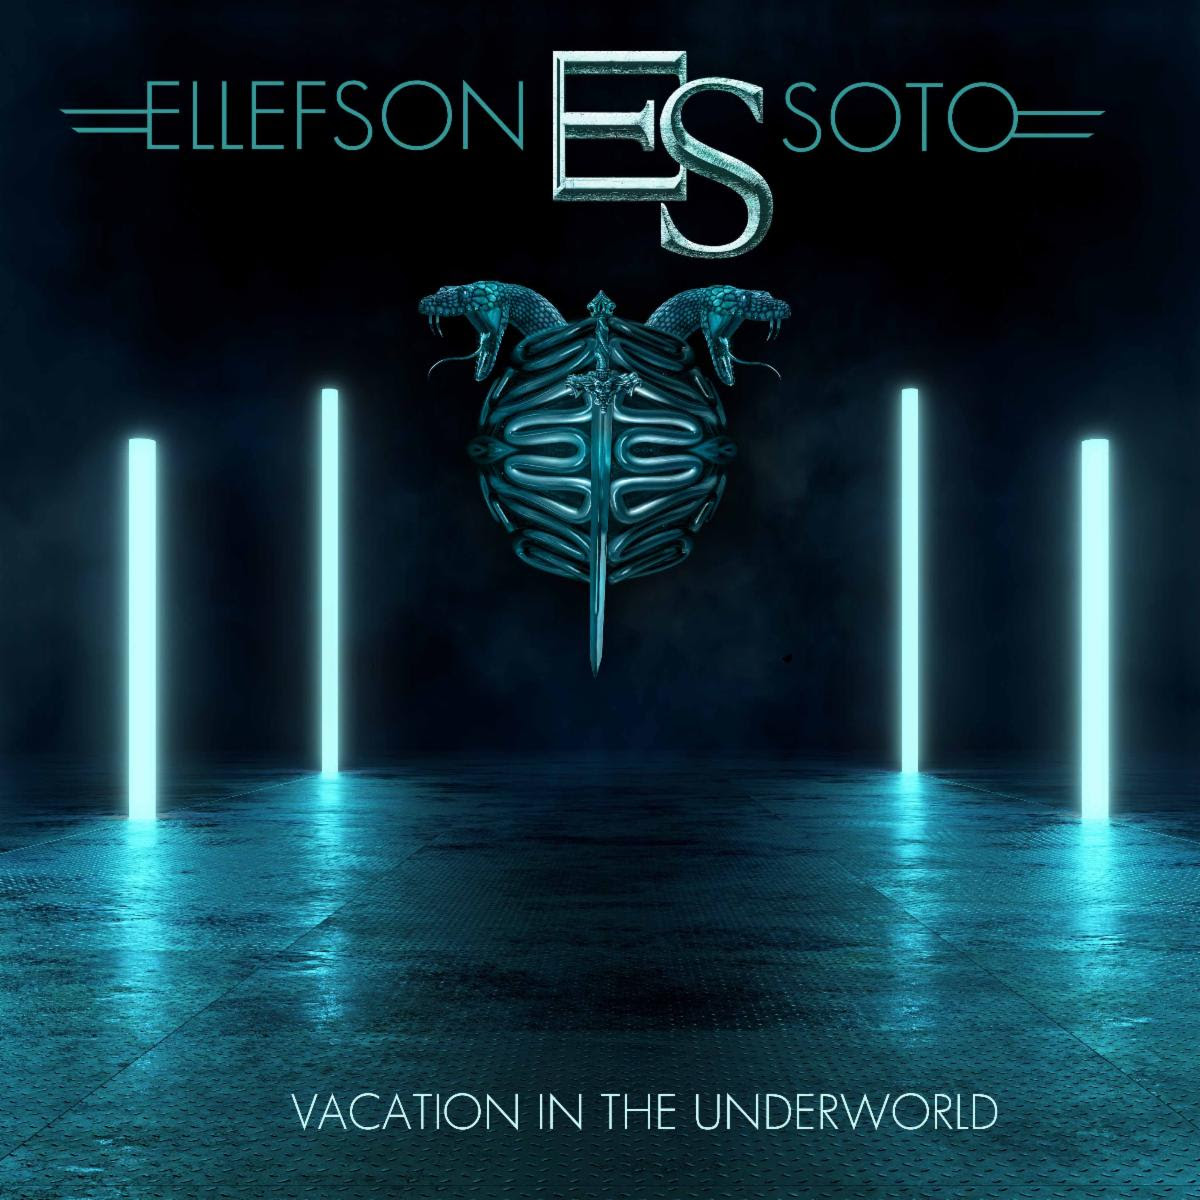 Former Yngwie Vocalist And Former Megadeth Bassist Team Up For Ellefson-Soto, Watch The First Video Here!